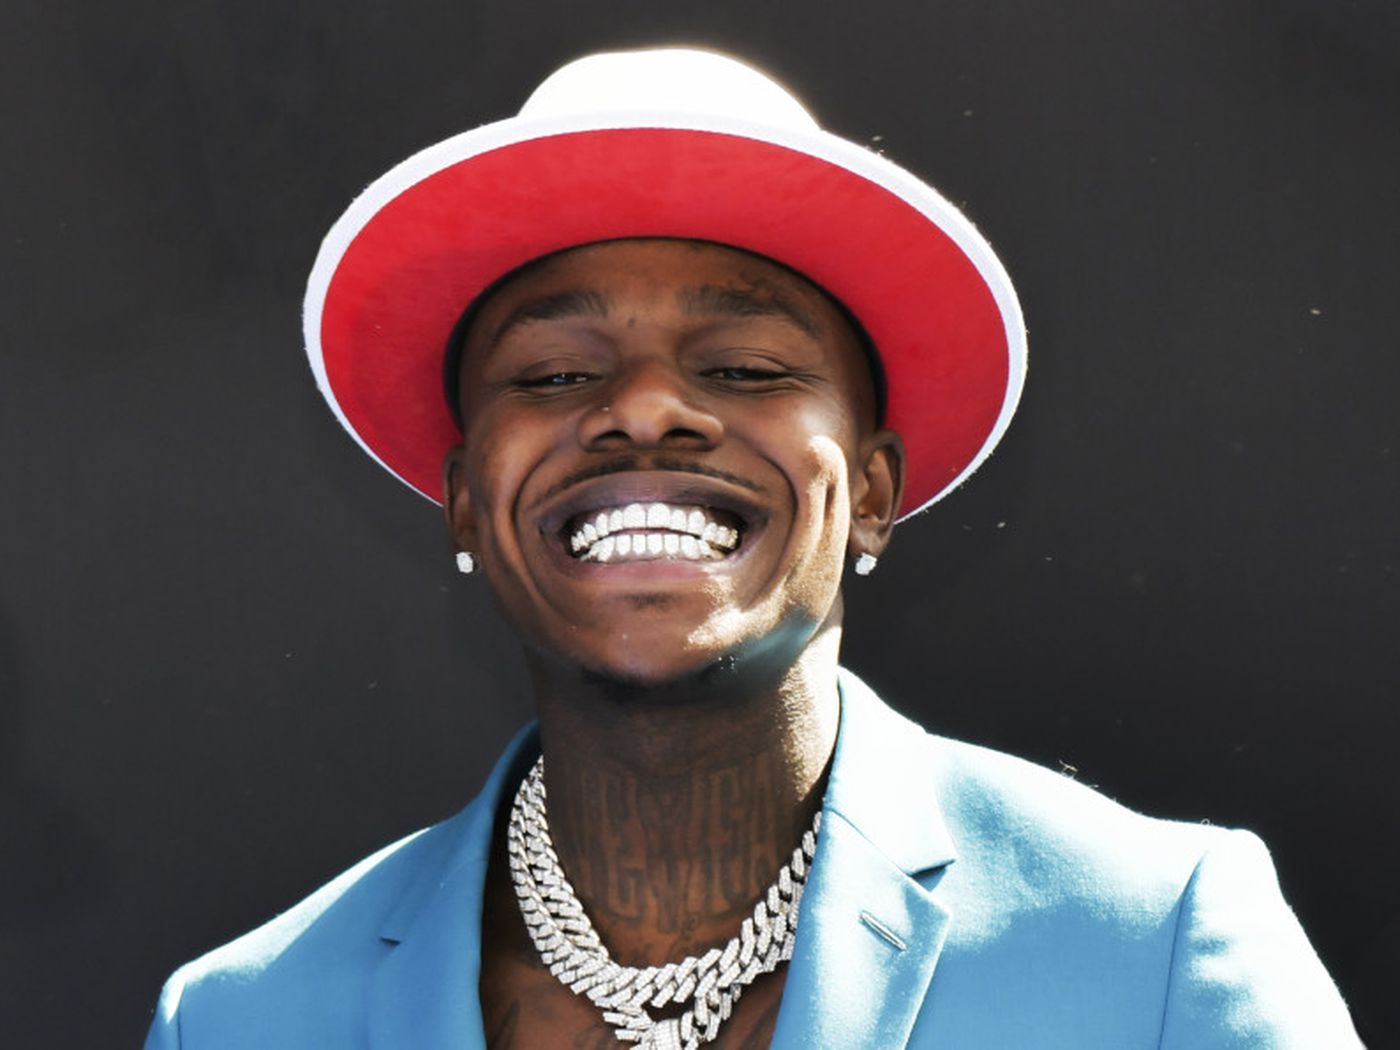 DaBaby says 'Blame It On Baby' with new album